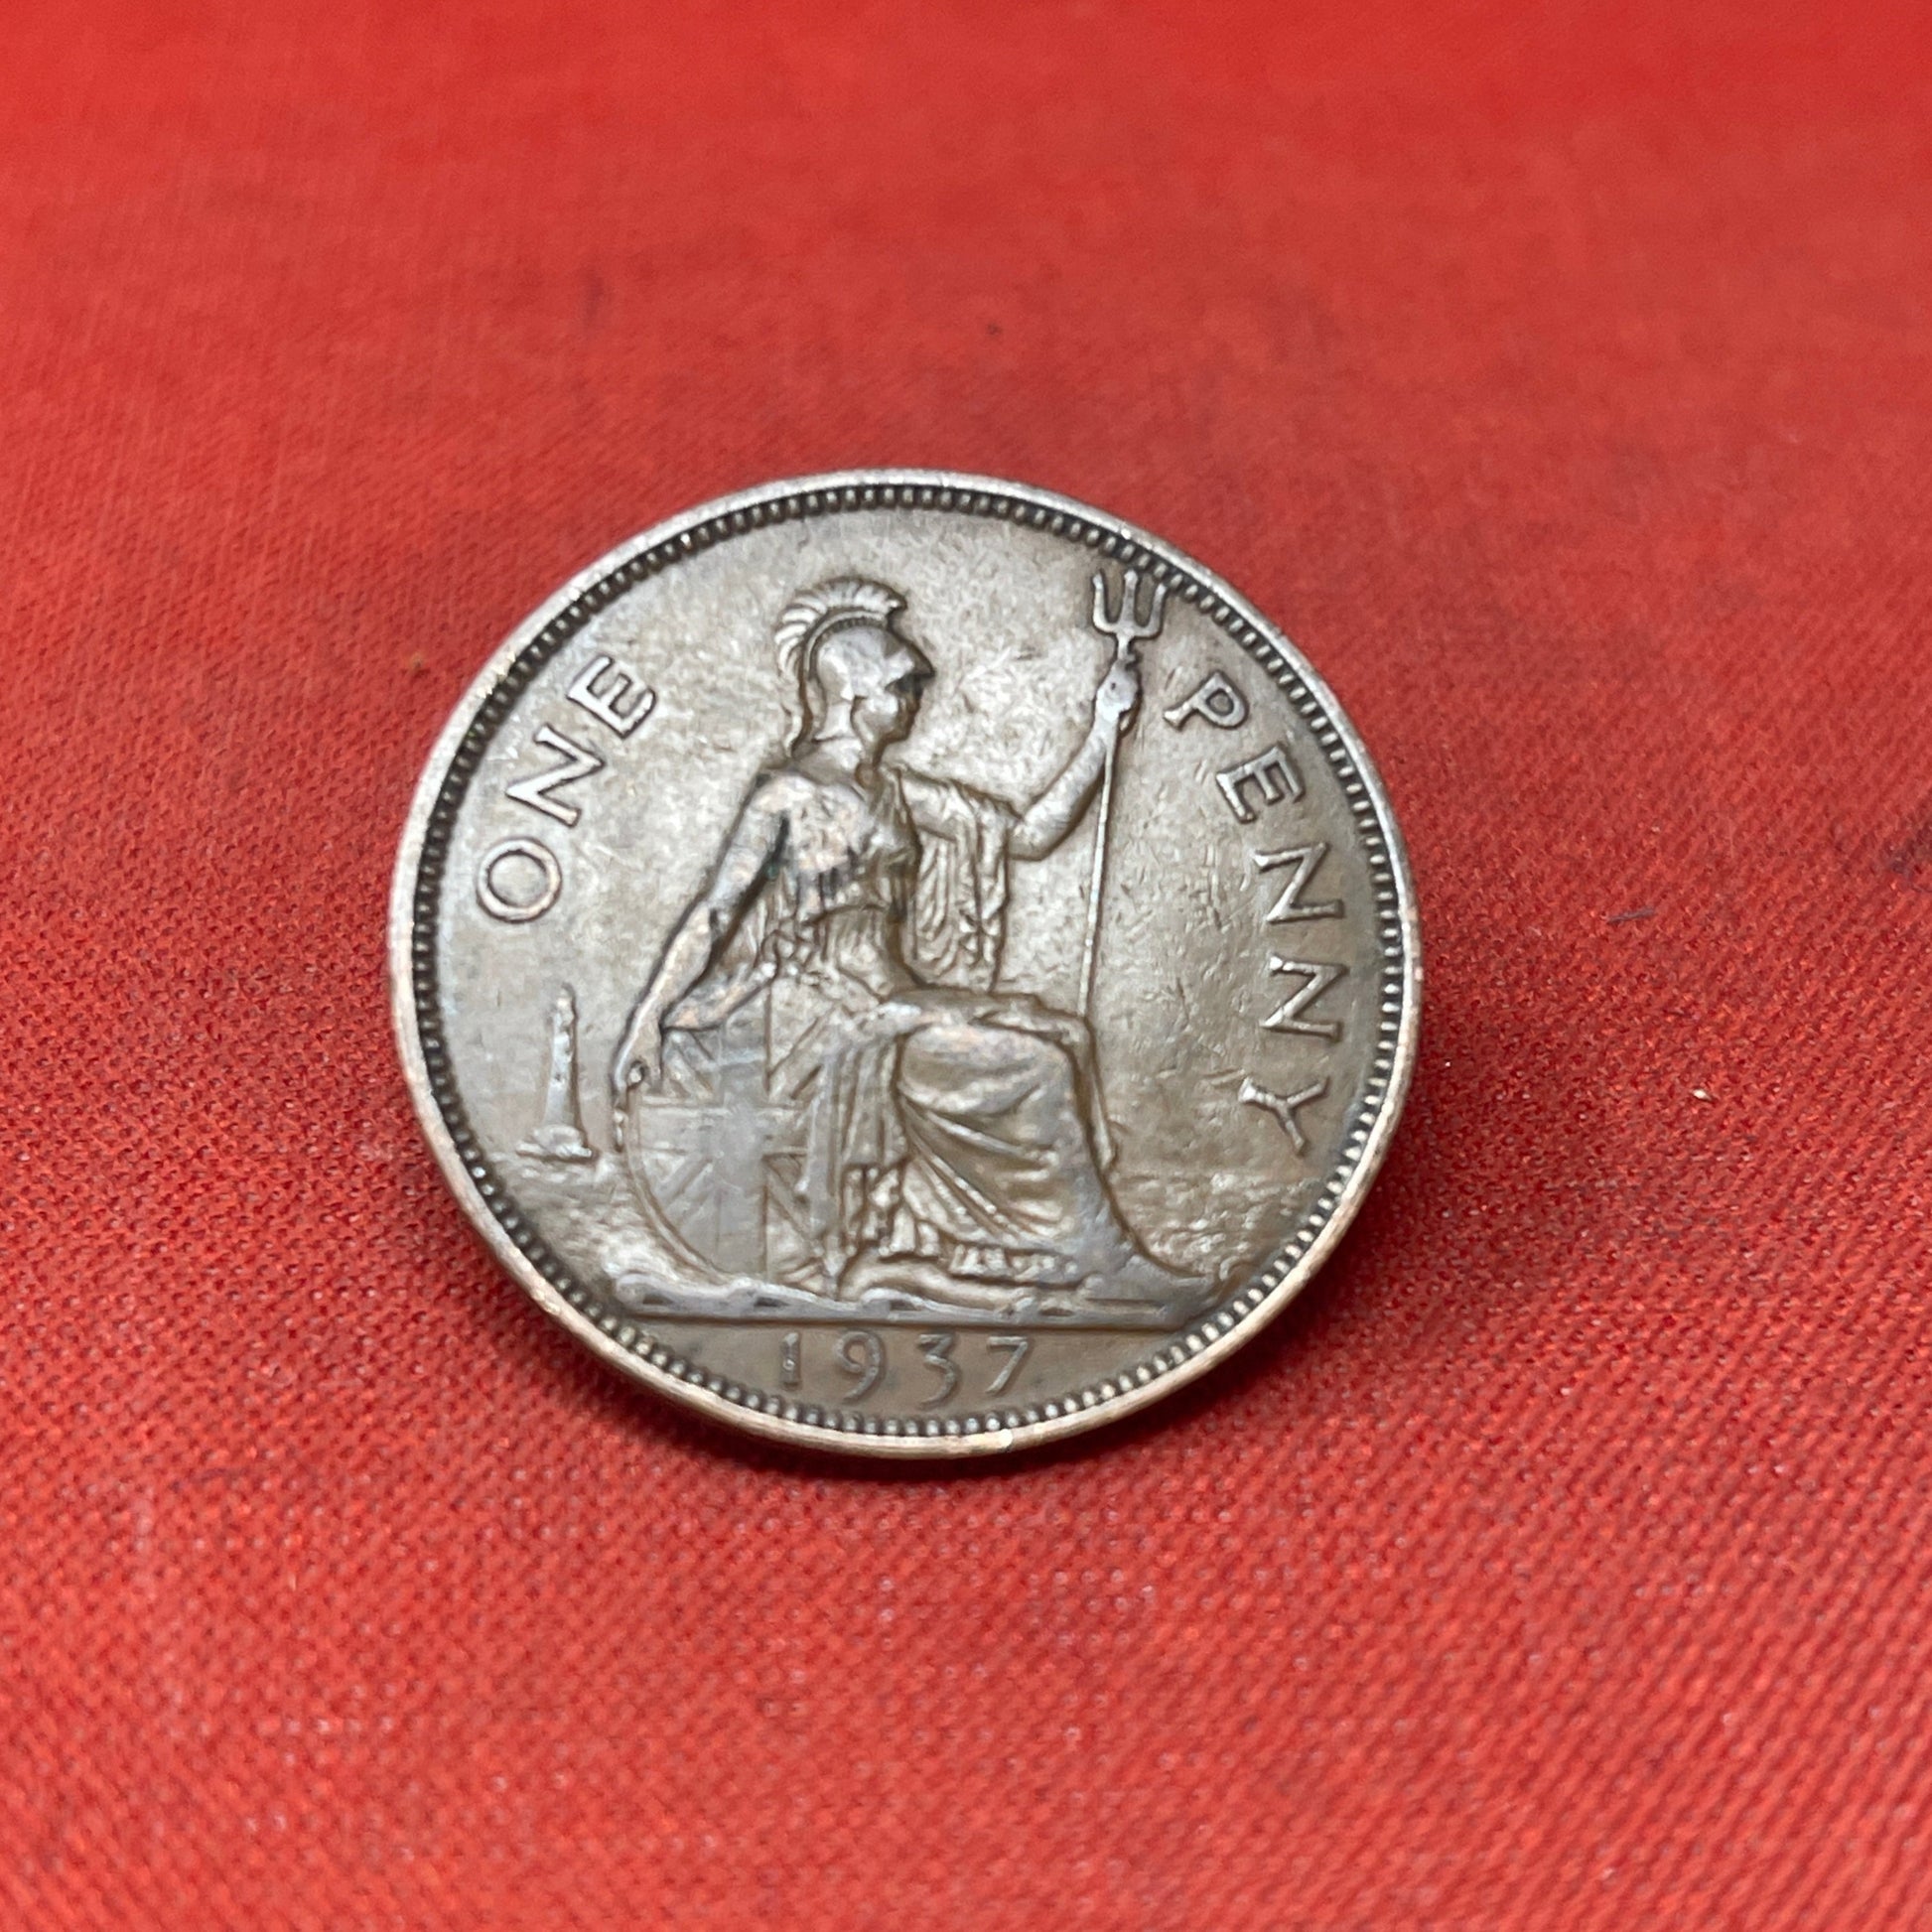 Explore the historical significance of the King George VI One Penny coin, minted from 1937 to 1952. Ideal for collectors and history enthusiasts seeking an authentic piece of British numismatic heritage